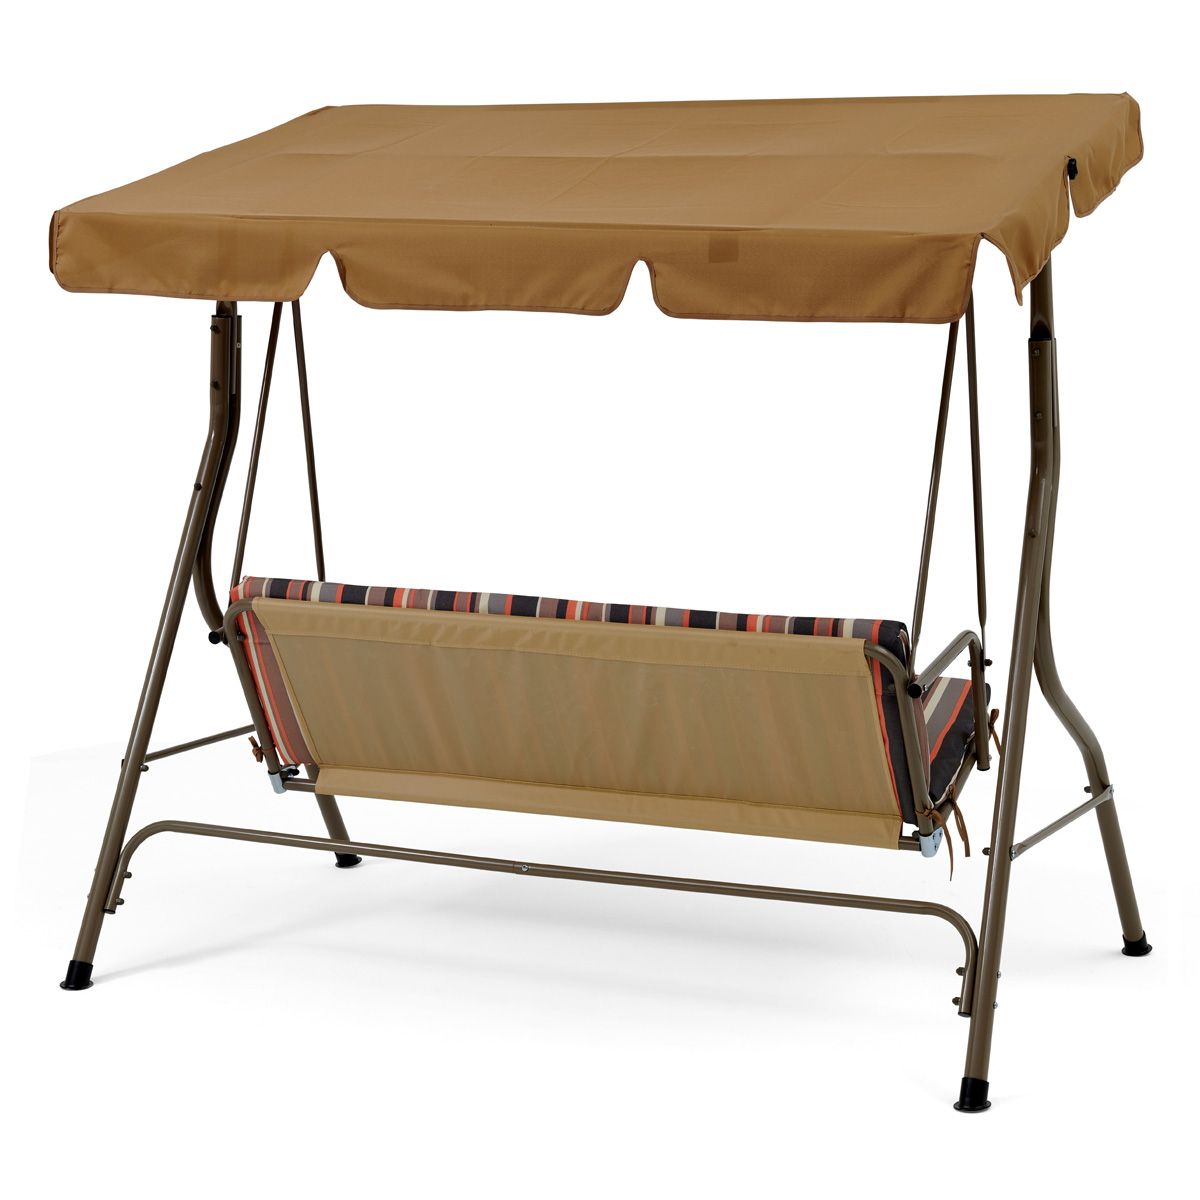 3 Seater Swings With Frame And Canopy Within Widely Used Glory 3 Seater Swing (View 14 of 30)